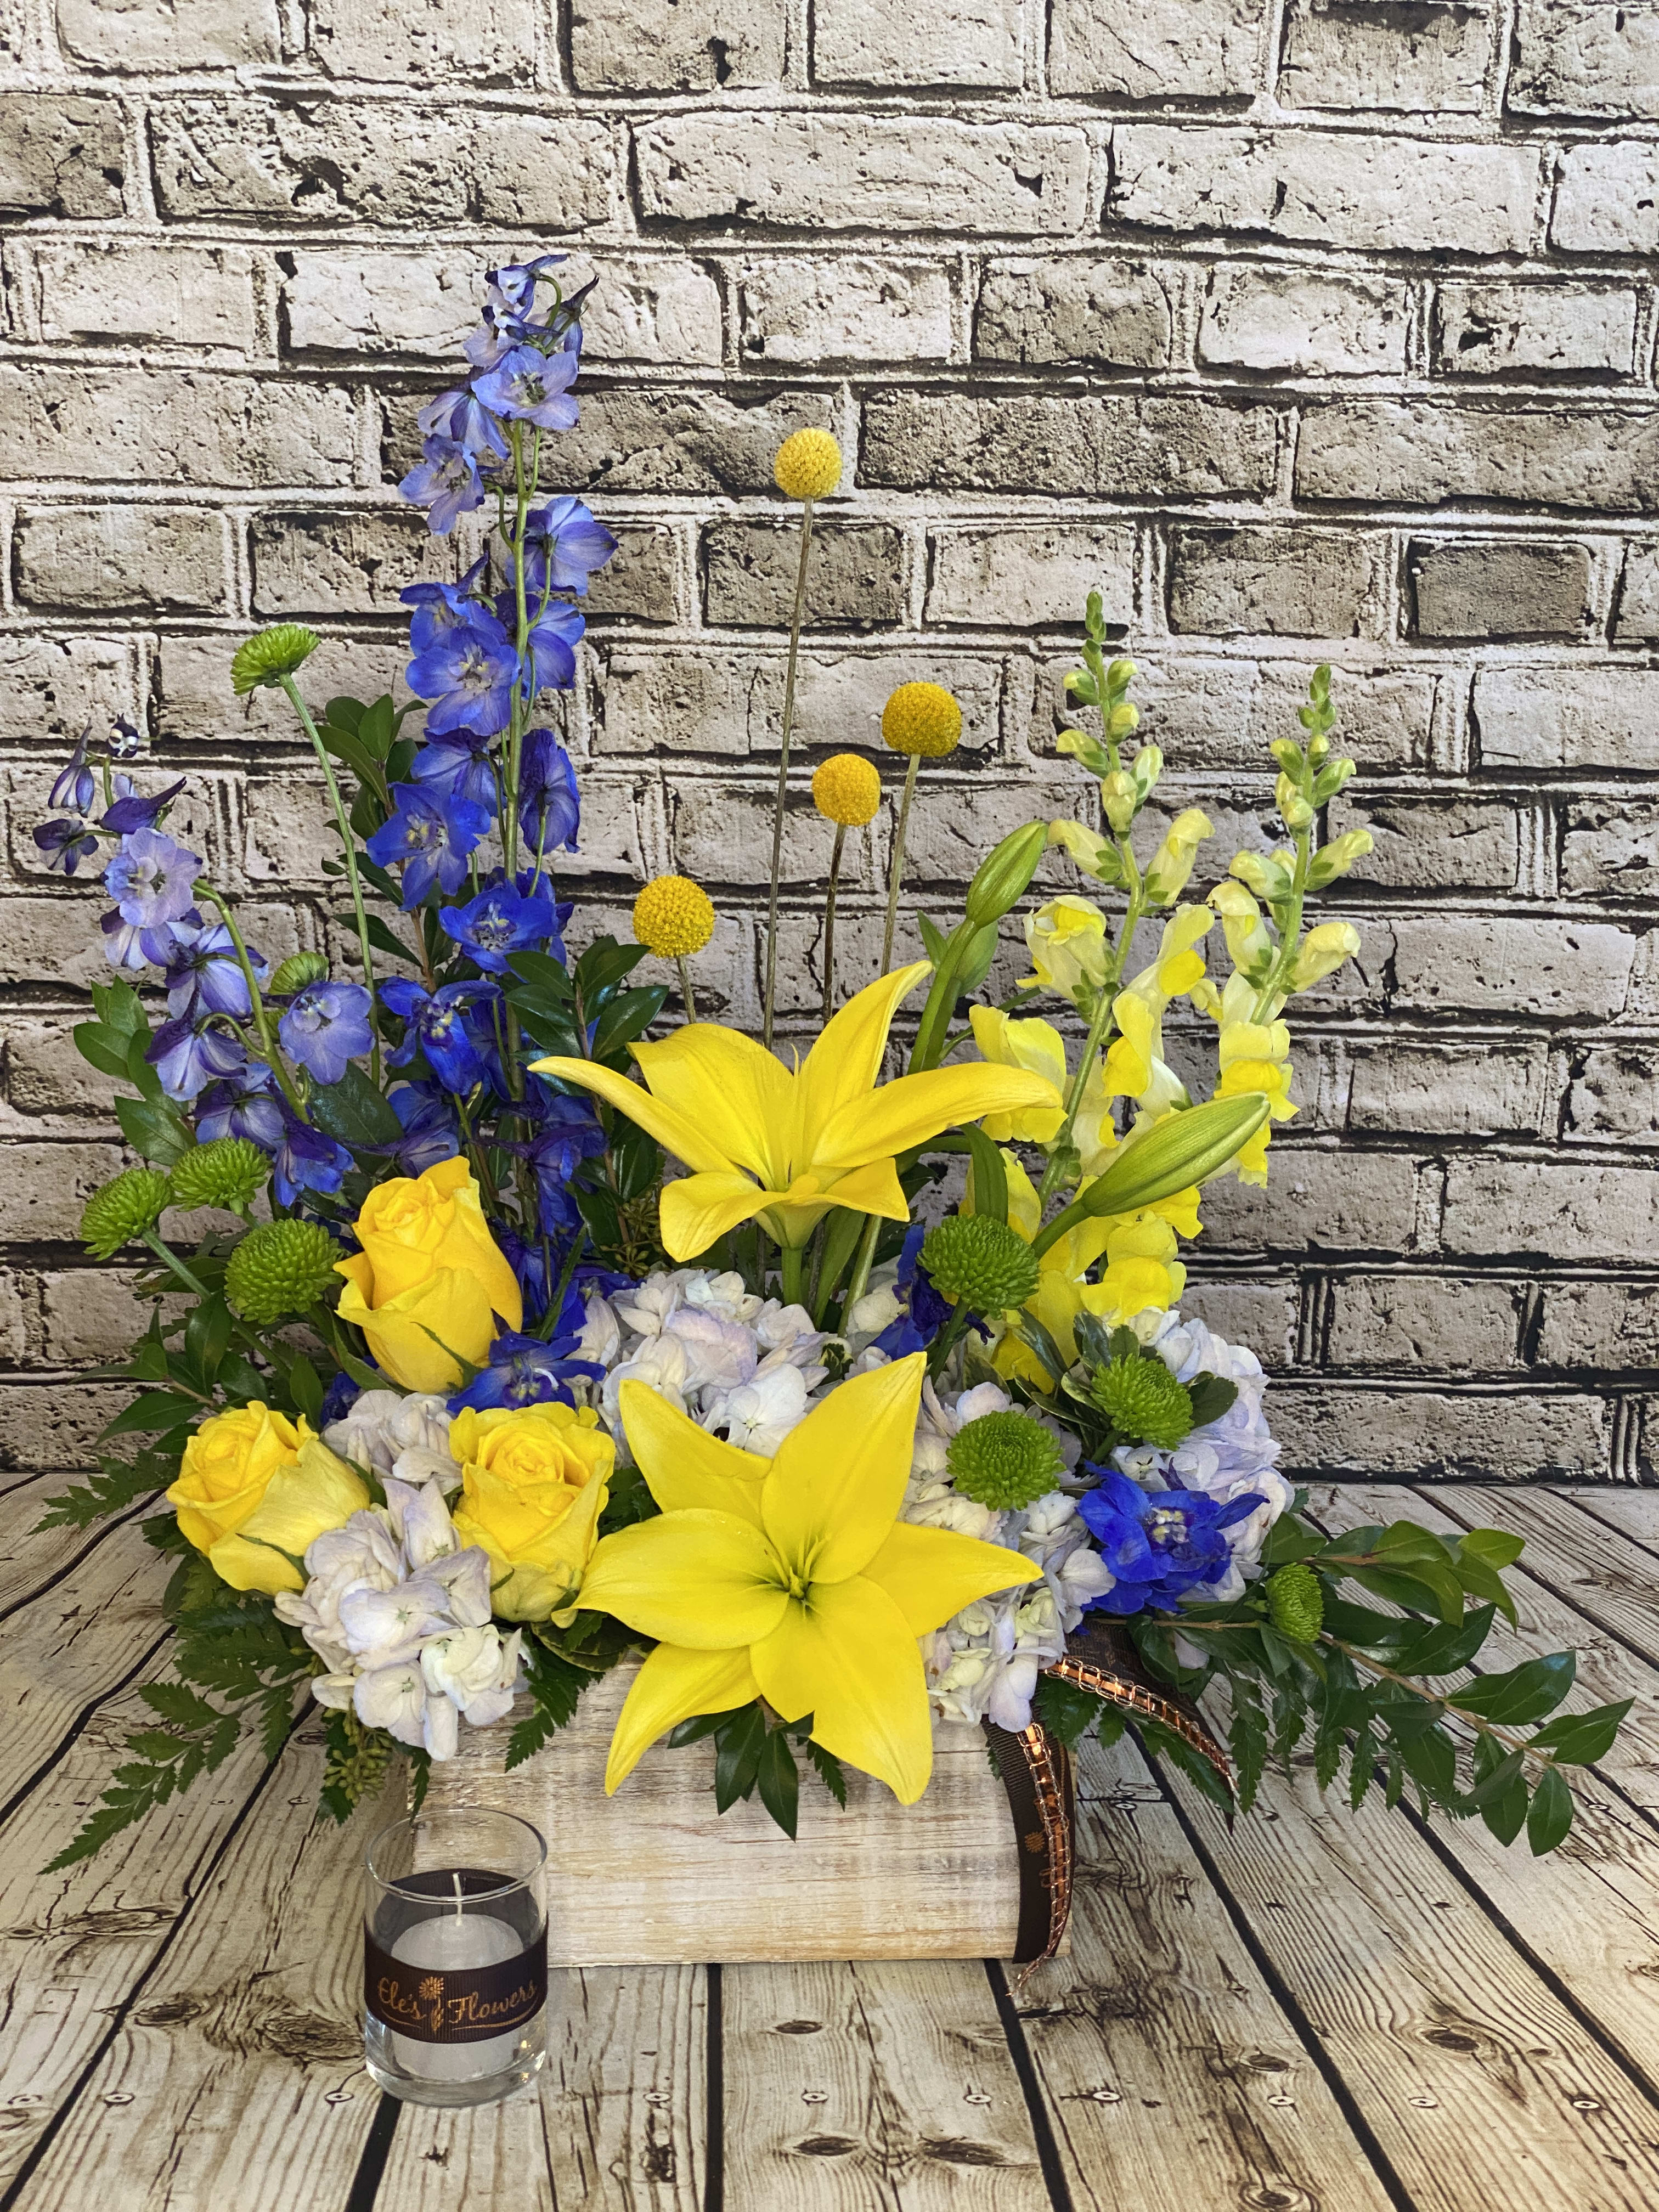 Blue, White, Yellow Remembrance Arrangement  - A lovely assortment of blues, yellows and white. Our design has a wildflower like appearance. The designs we create are custom and the blooms and containers will vary. We use the freshest product available to create the perfect floral combination for the recipient! If you have any special requests, please add those in the &quot;special instructions&quot; portion of your order to help us dial in your vision. Otherwise, our skilled designers, Brett &amp; Sara, will take it from here! Please note that the photos are examples only – floral selection will vary but colors will remain the same.   Approx. Dimensions: 20”+H x 16”+W